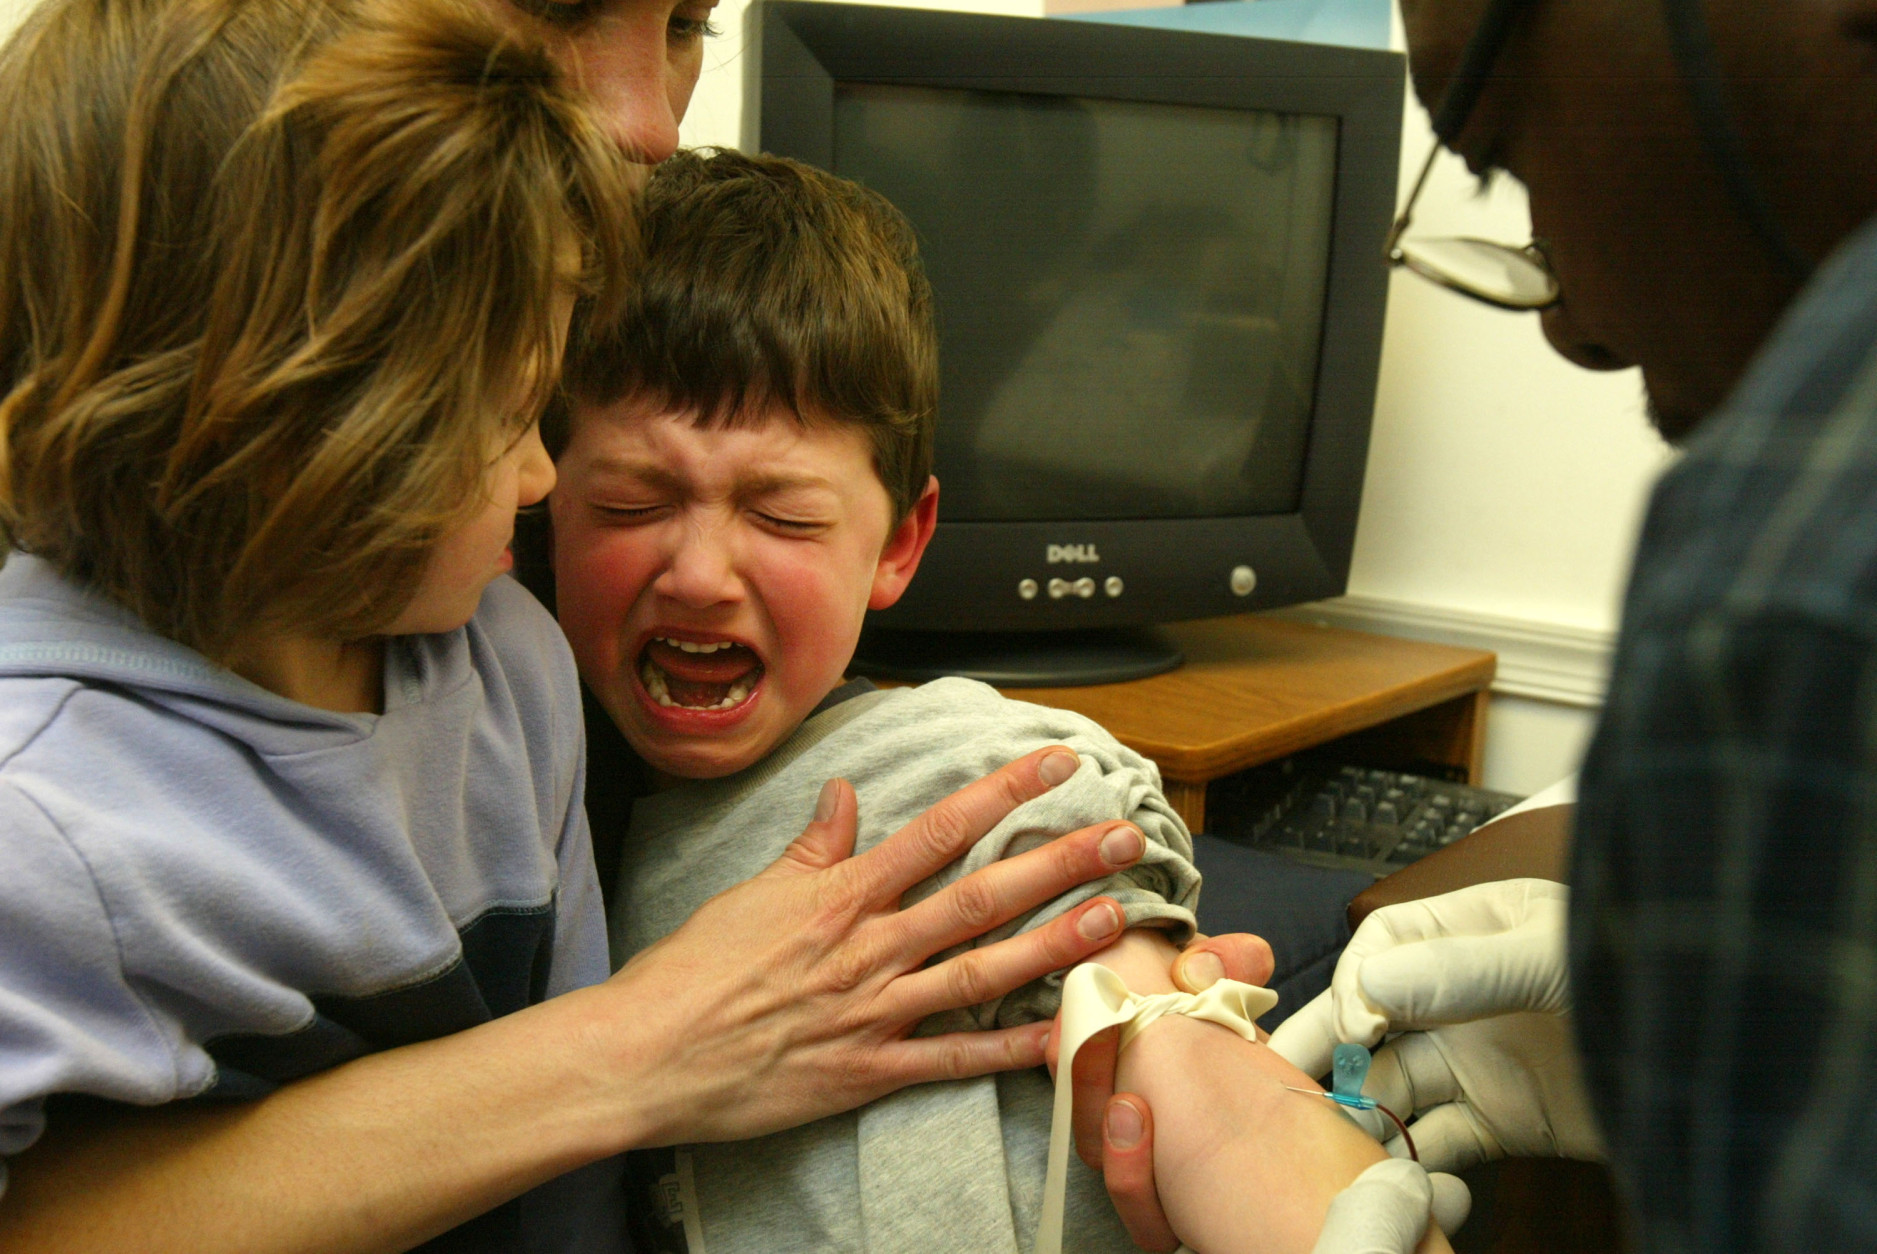 In 2004, four-year-old Nic Cappella cries as a blood sample is drawn.  (Photo by Alex Wong/Getty Images)